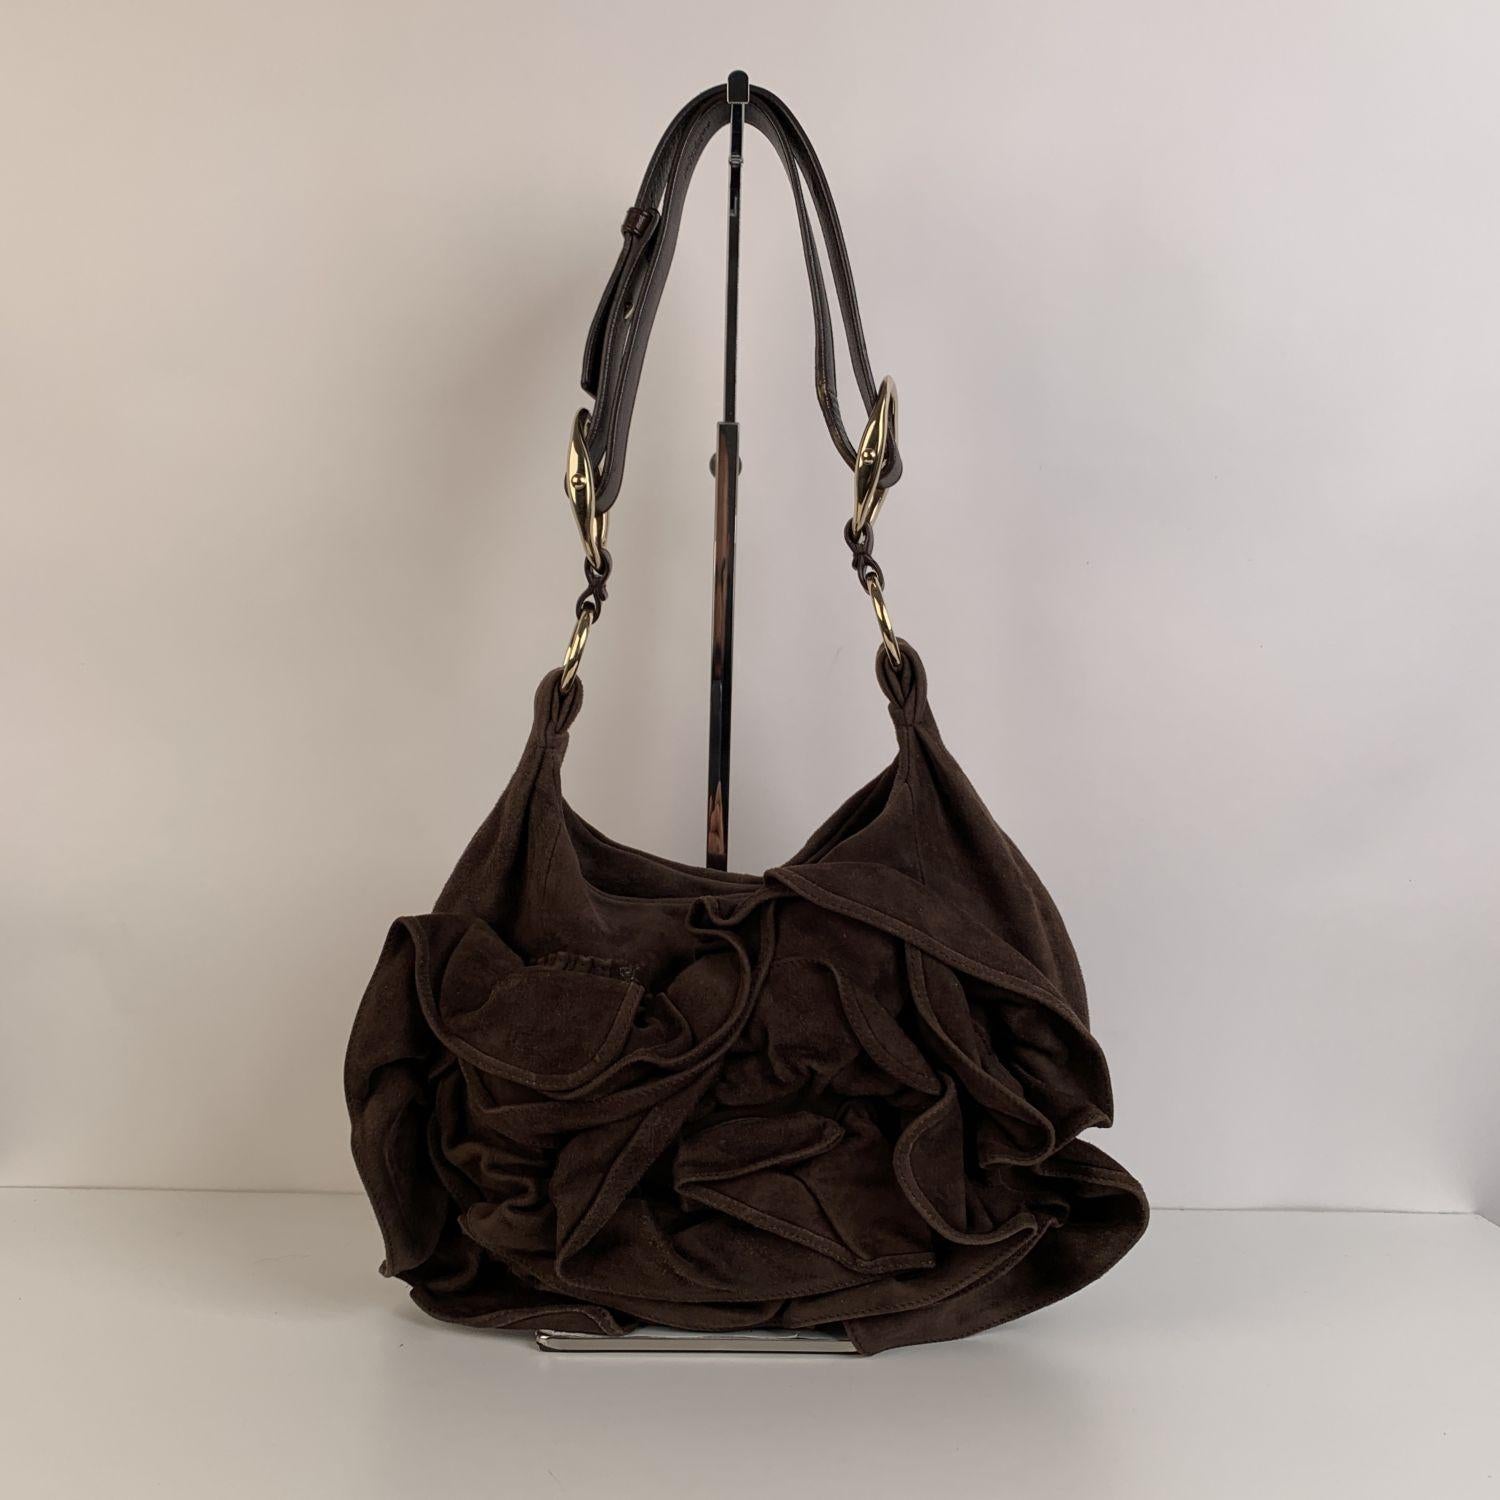 Yves Saint Laurent 'Nadja Rose' Shoulder Bag, crafted in brown suede. It features a ruffled rose detail on the front. Magnetic button closure on top. Brown suede lining. 1 side zip pocket and 1 side open pocket inside. 'yves Saint Laurent Rive